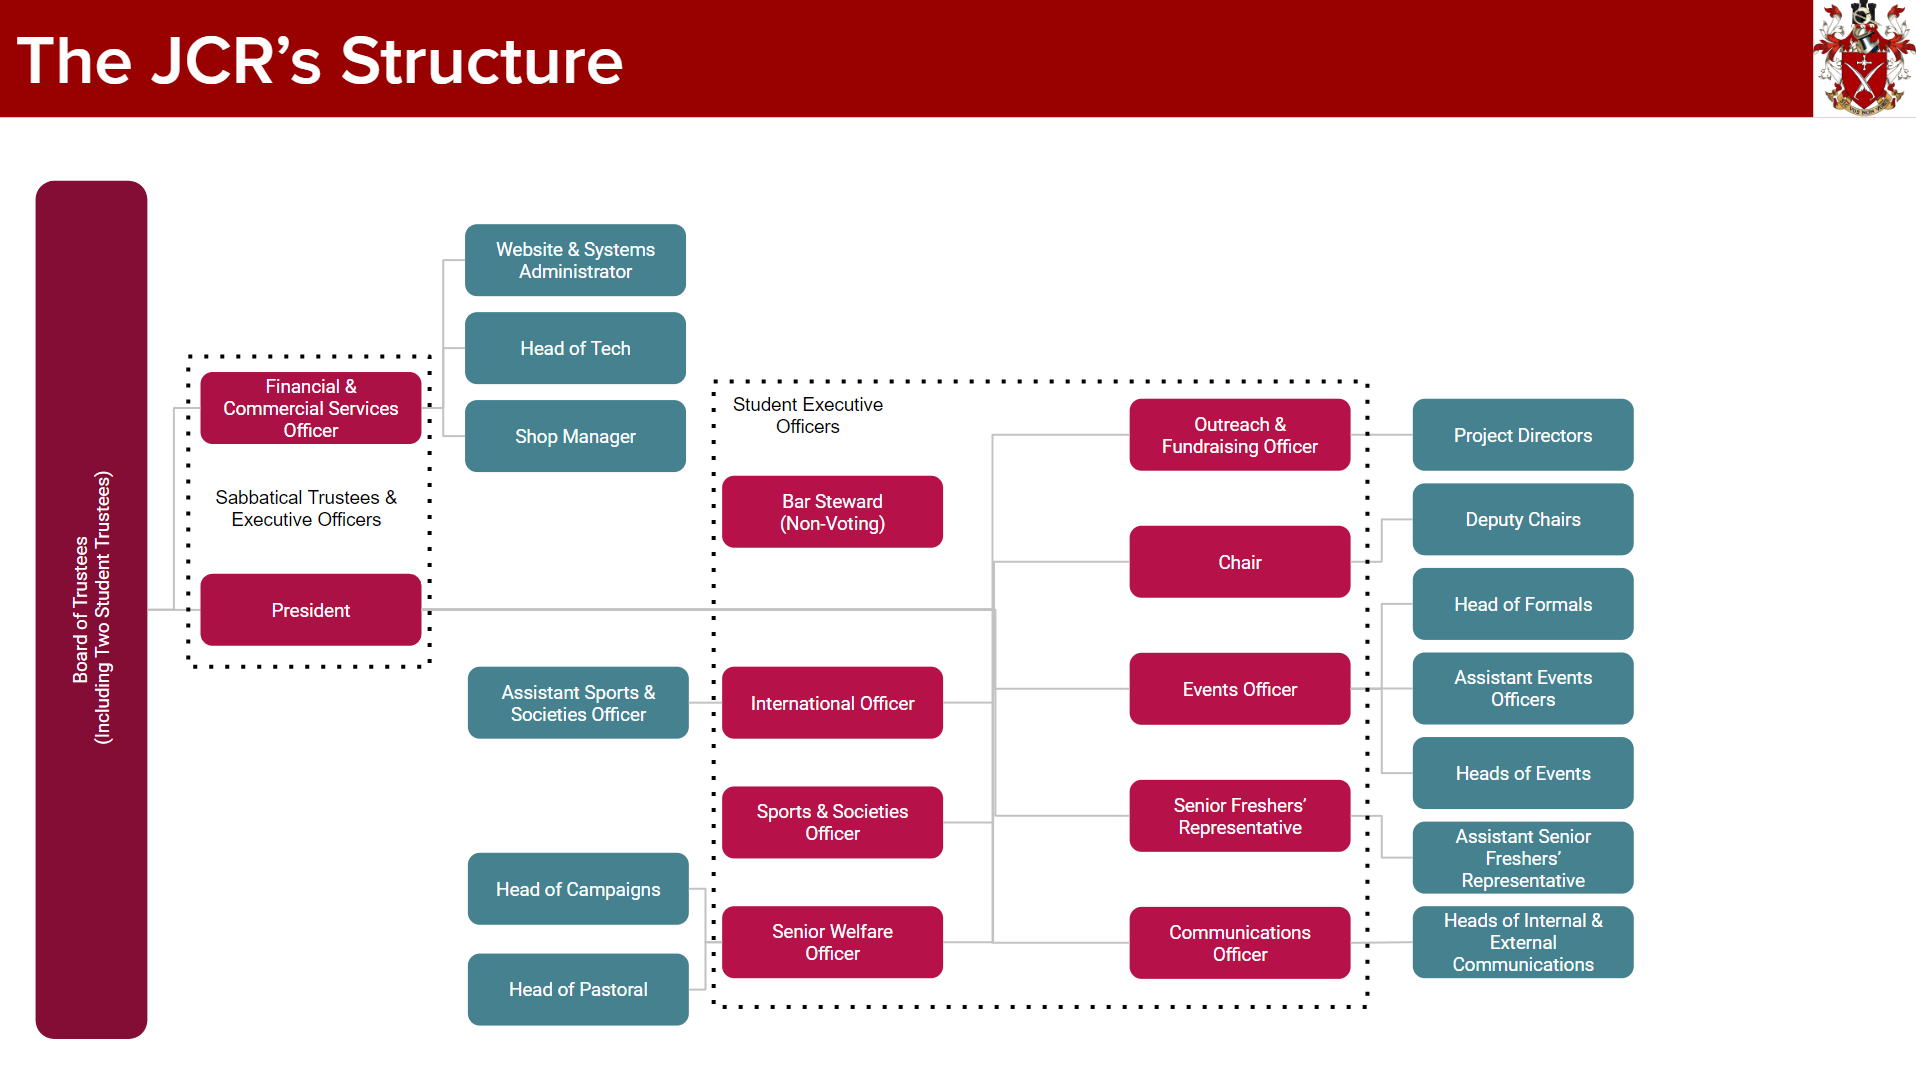 Diagram outlining the leadership structure of the JCR